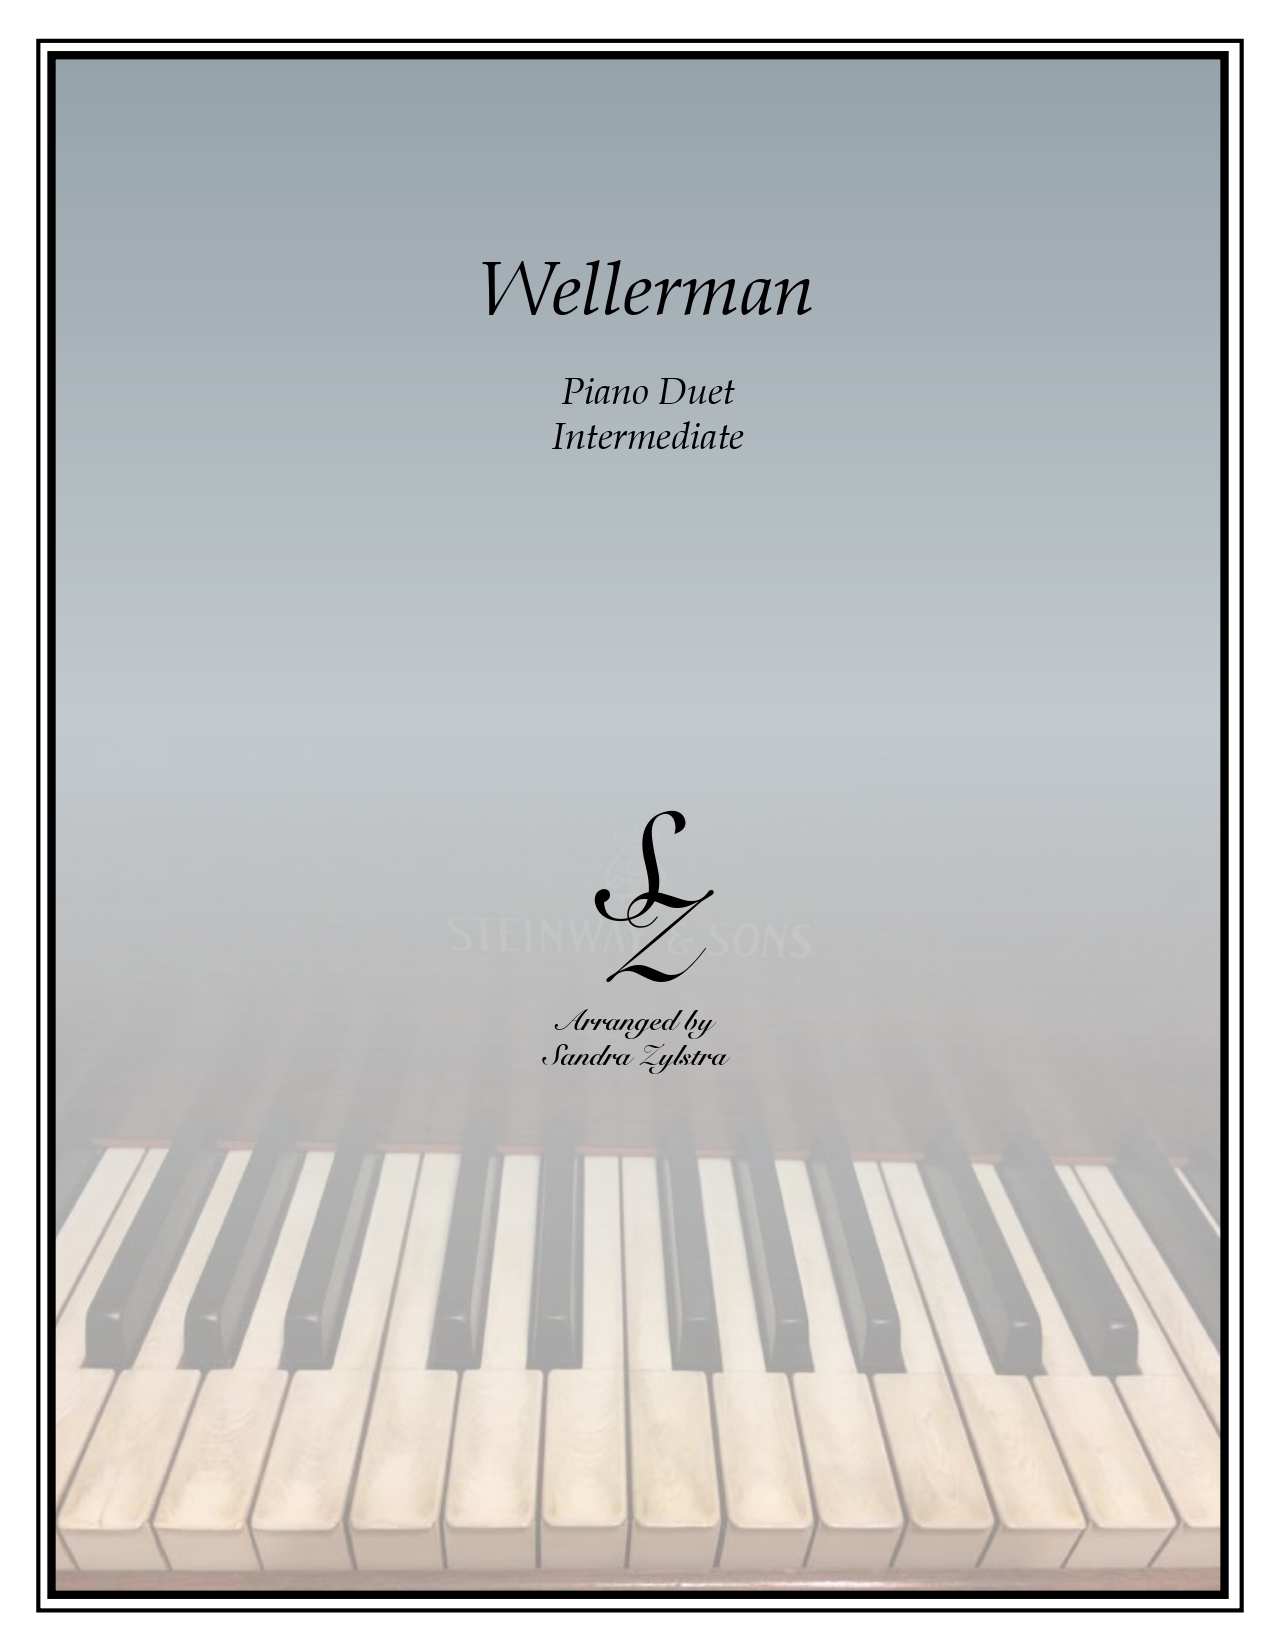 Wellerman intermediate piano duet cover page 00011